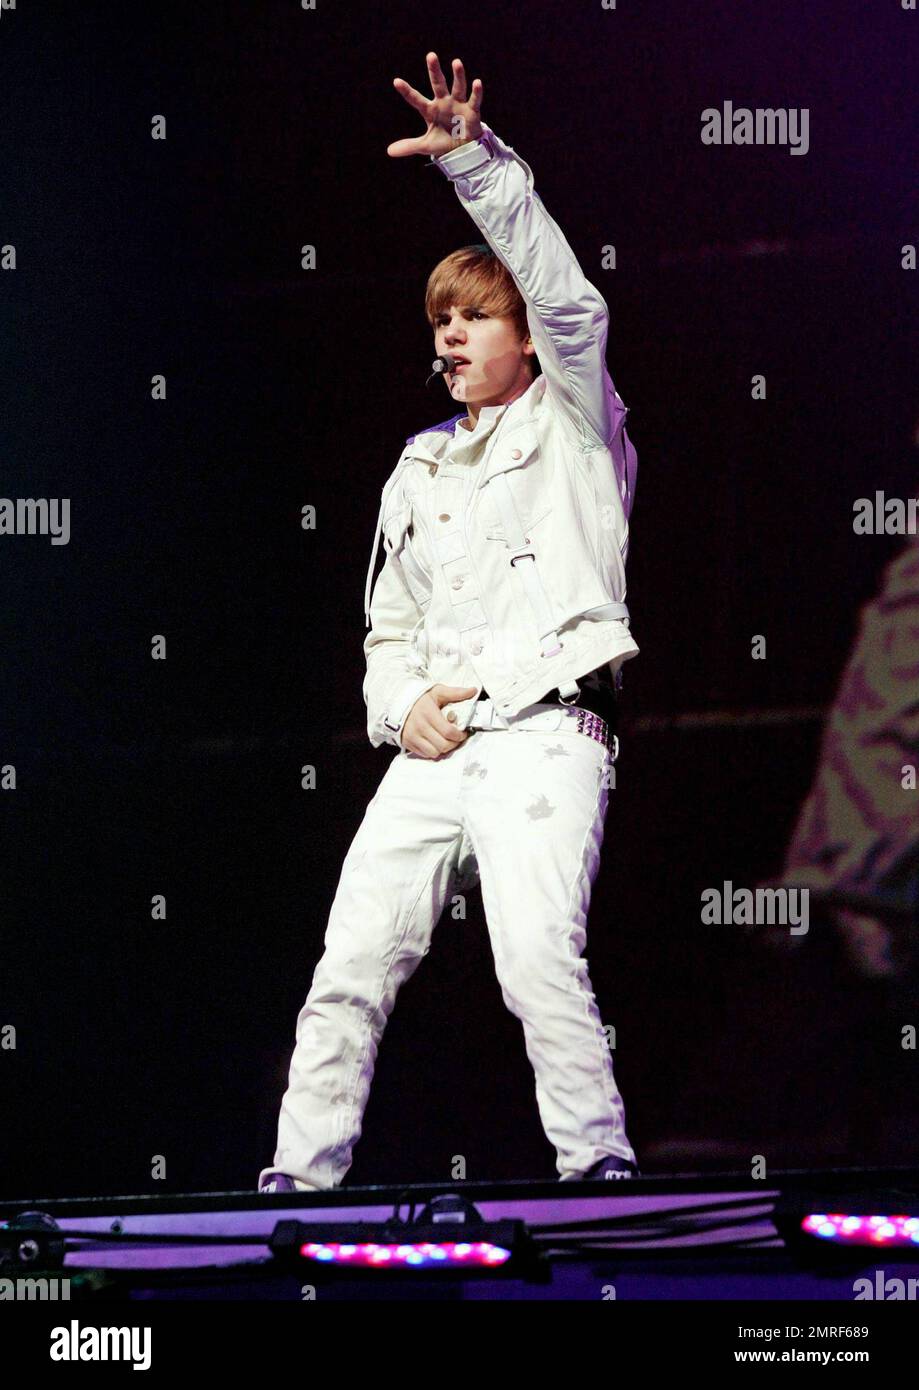 fritid kromatisk Flyve drage In a white buckle-detailed jacket, trendy paint splattered white jeans and  his trademark purple high top sneakers teen heartthrob Justin Bieber  performs live in concert at the American Airlines Arena. Bieber threw